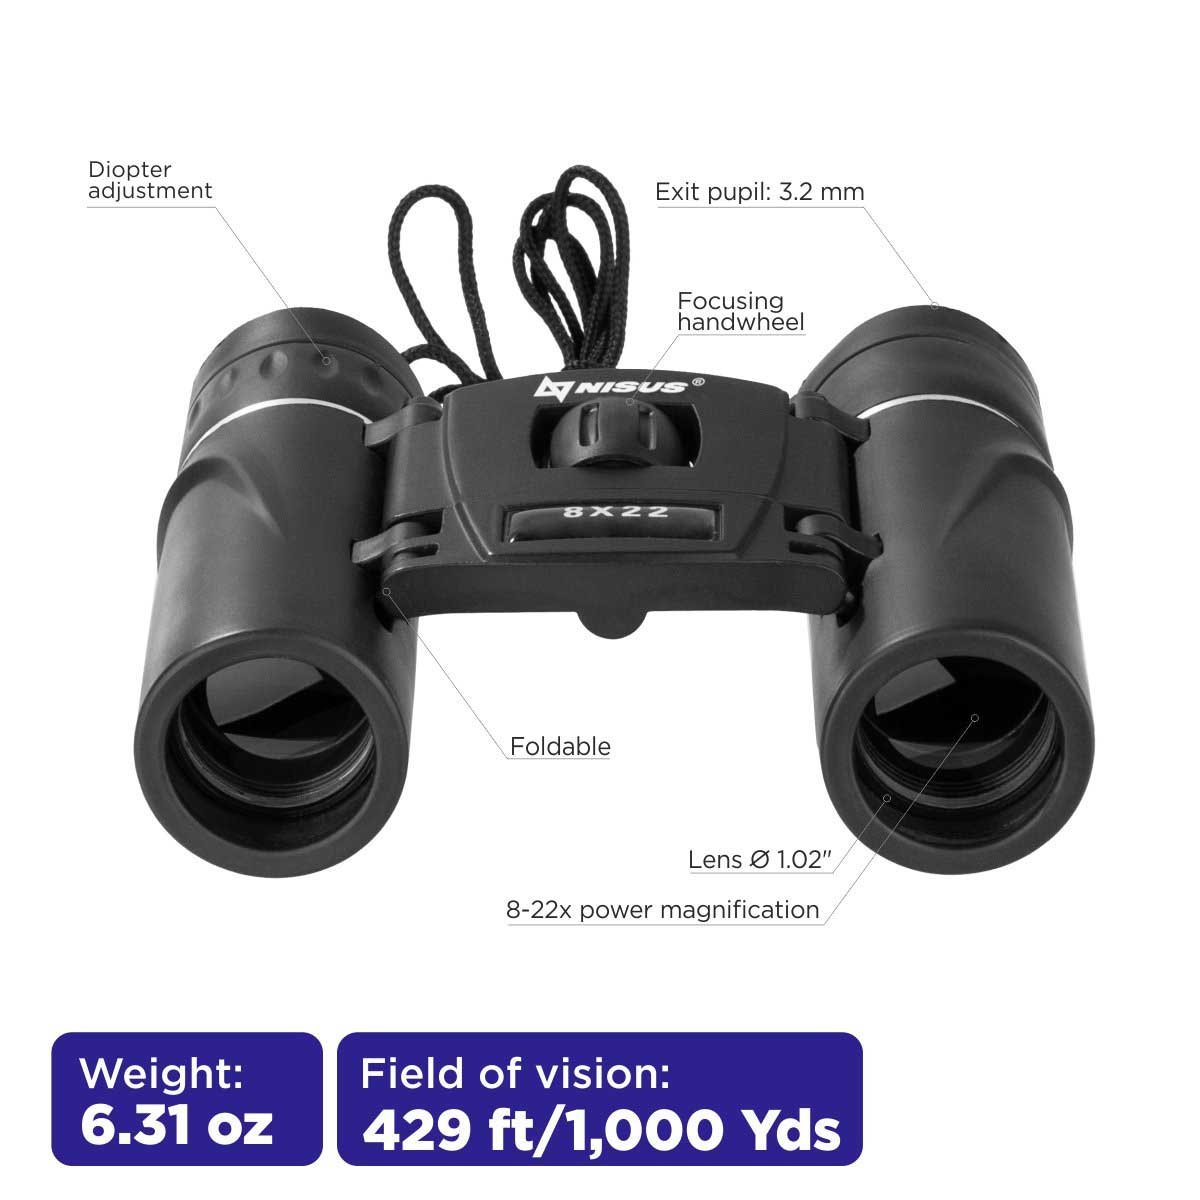 8x22 Compact Lightweight Binocular for Backpacking weighs 6.31 oz, stands for a 429 ft/1000 yards field of vision, boasts its 1-inch lens, focusing handwheel and diopter adjustment